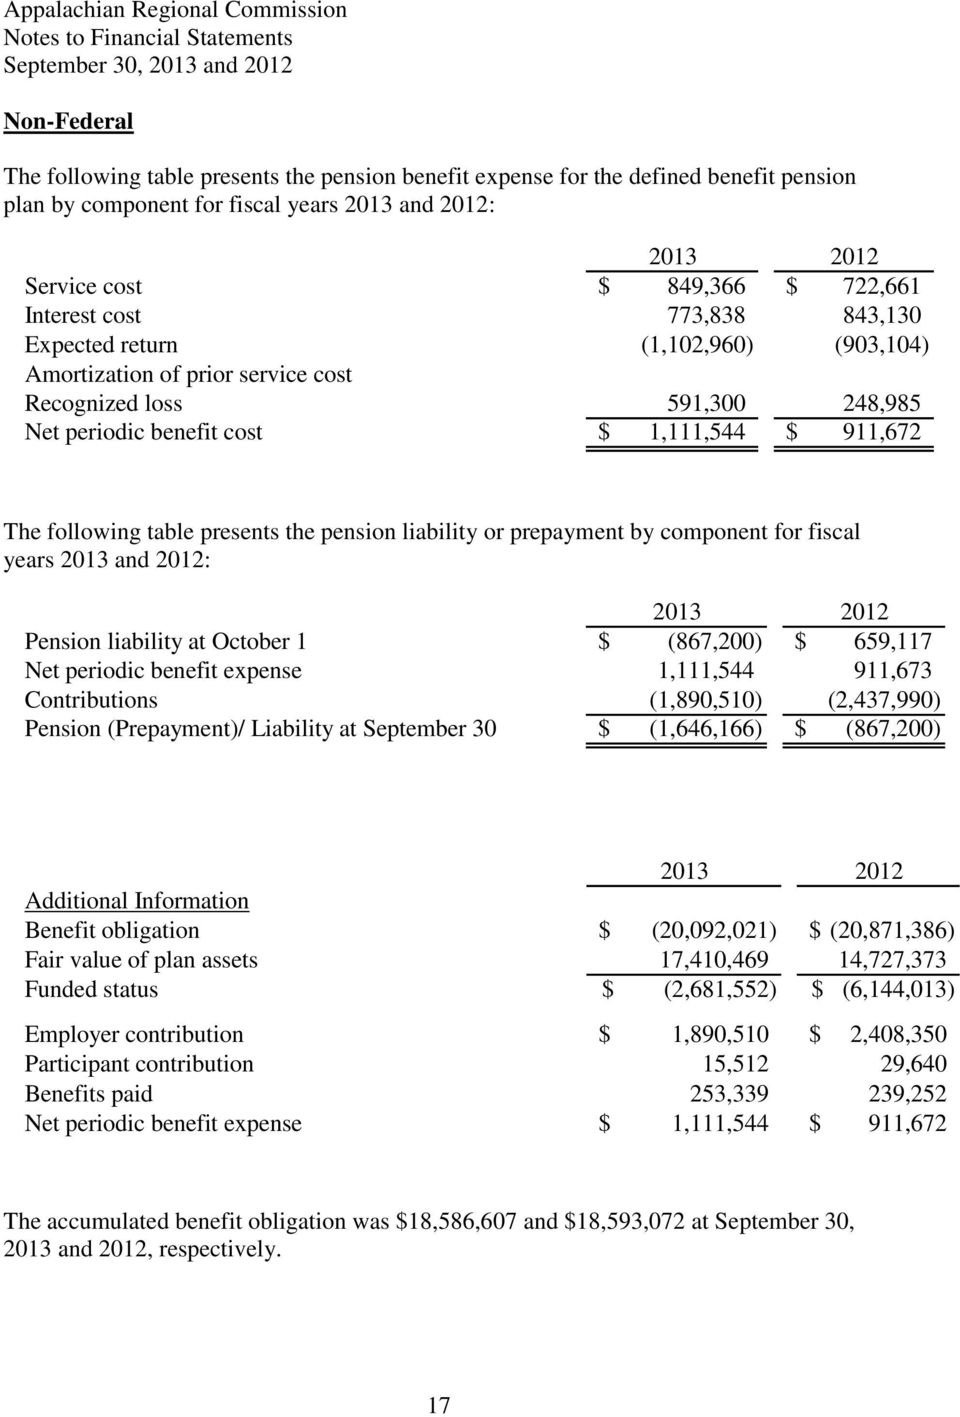 the pension liability or prepayment by component for fiscal years 2013 and 2012: Pension liability at October 1 $ (867,200) $ 659,117 Net periodic benefit expense 1,111,544 911,673 Contributions